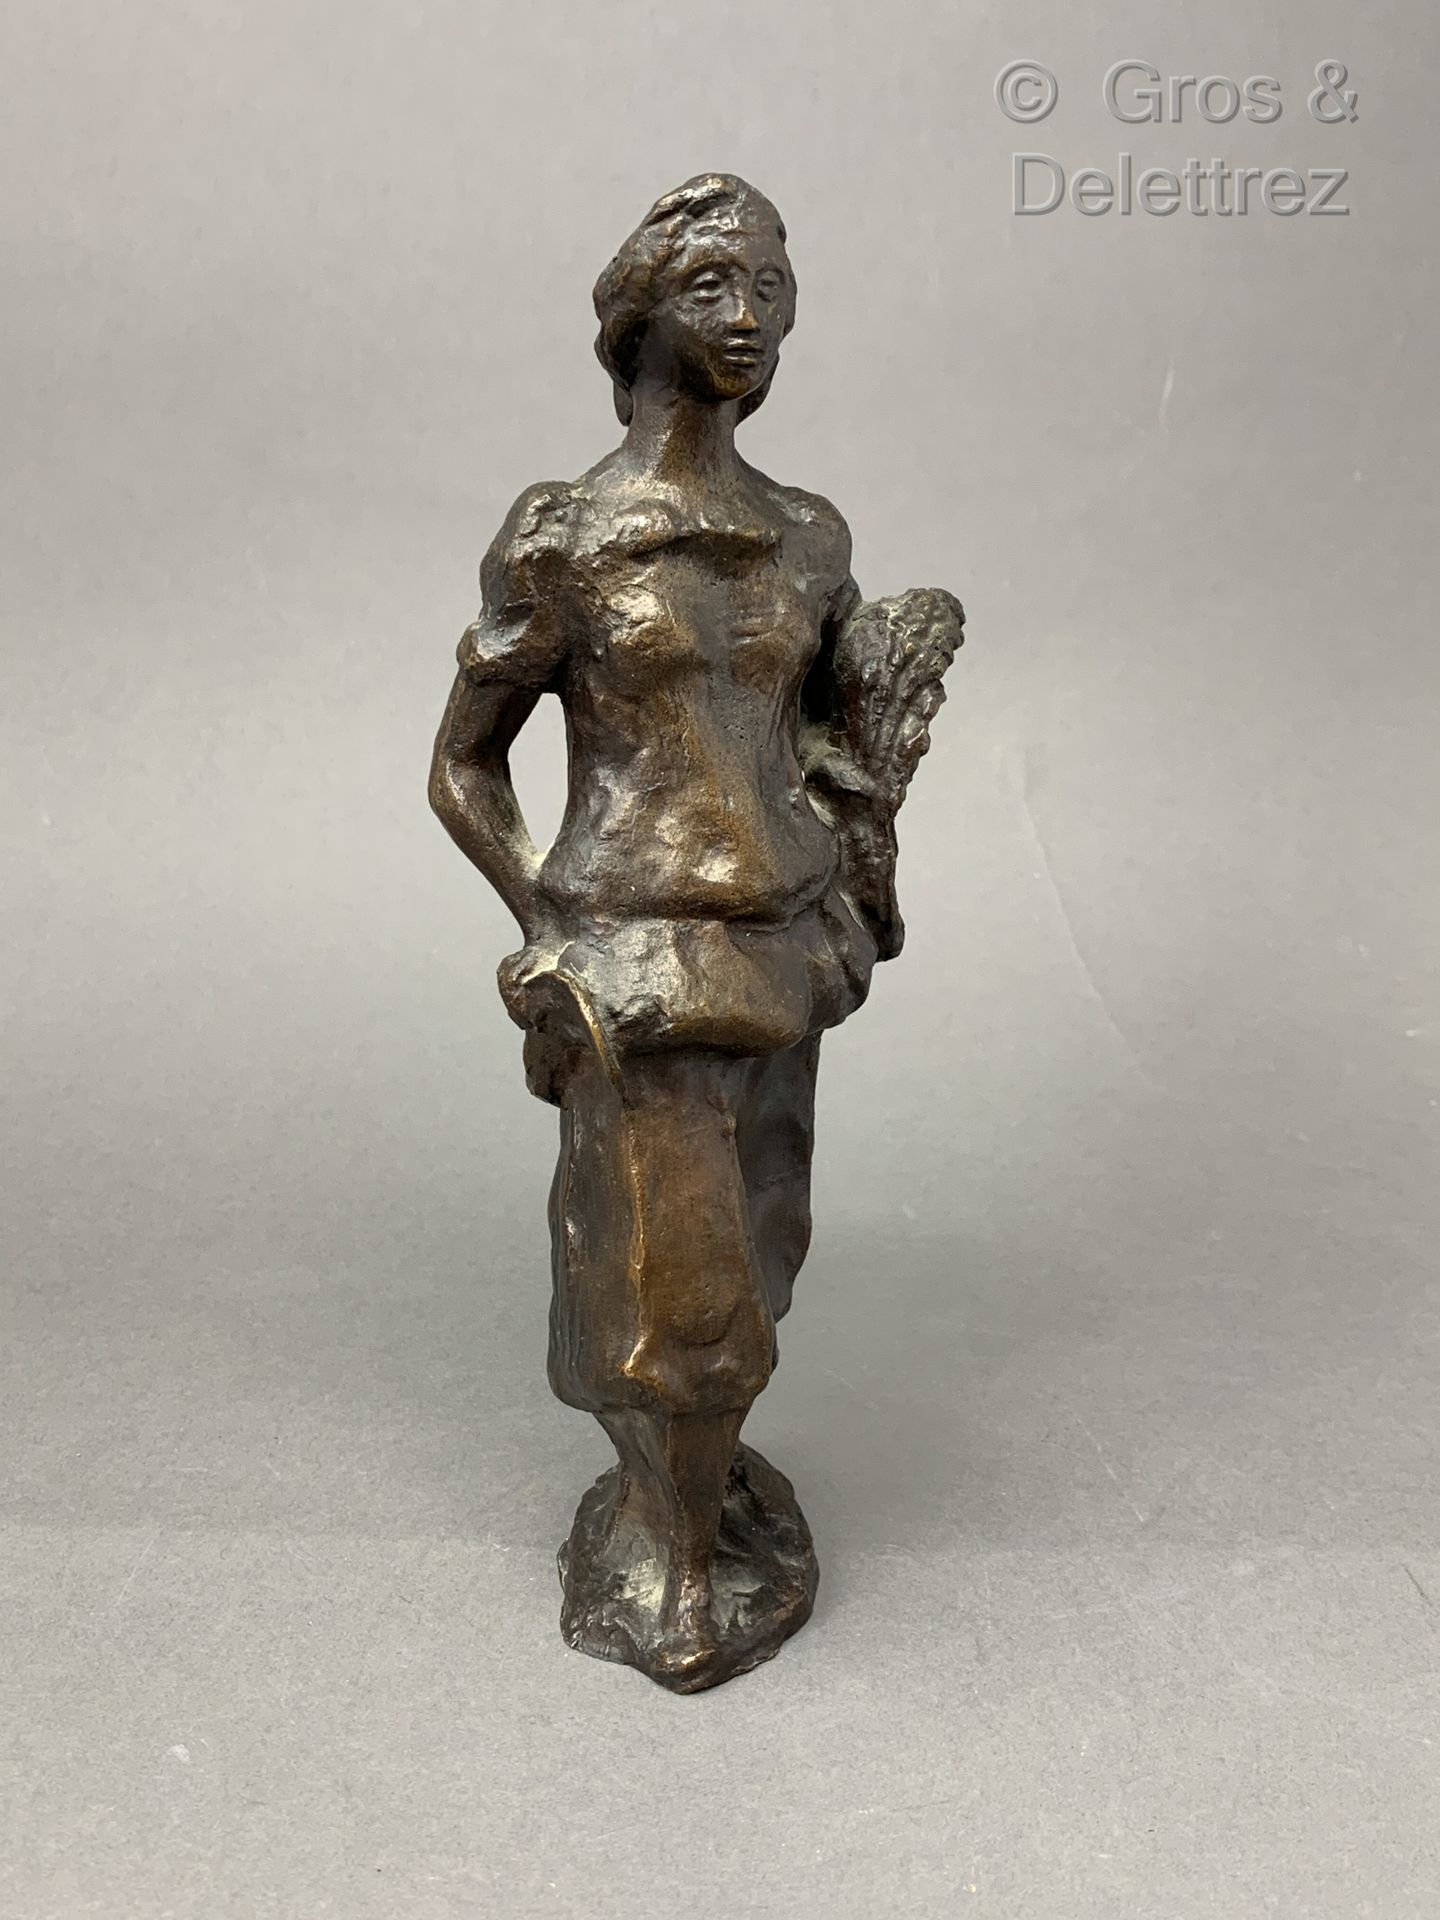 Null FRENCH WORK 1930-1940

Sculpture in bronze with brown patina representing a&hellip;